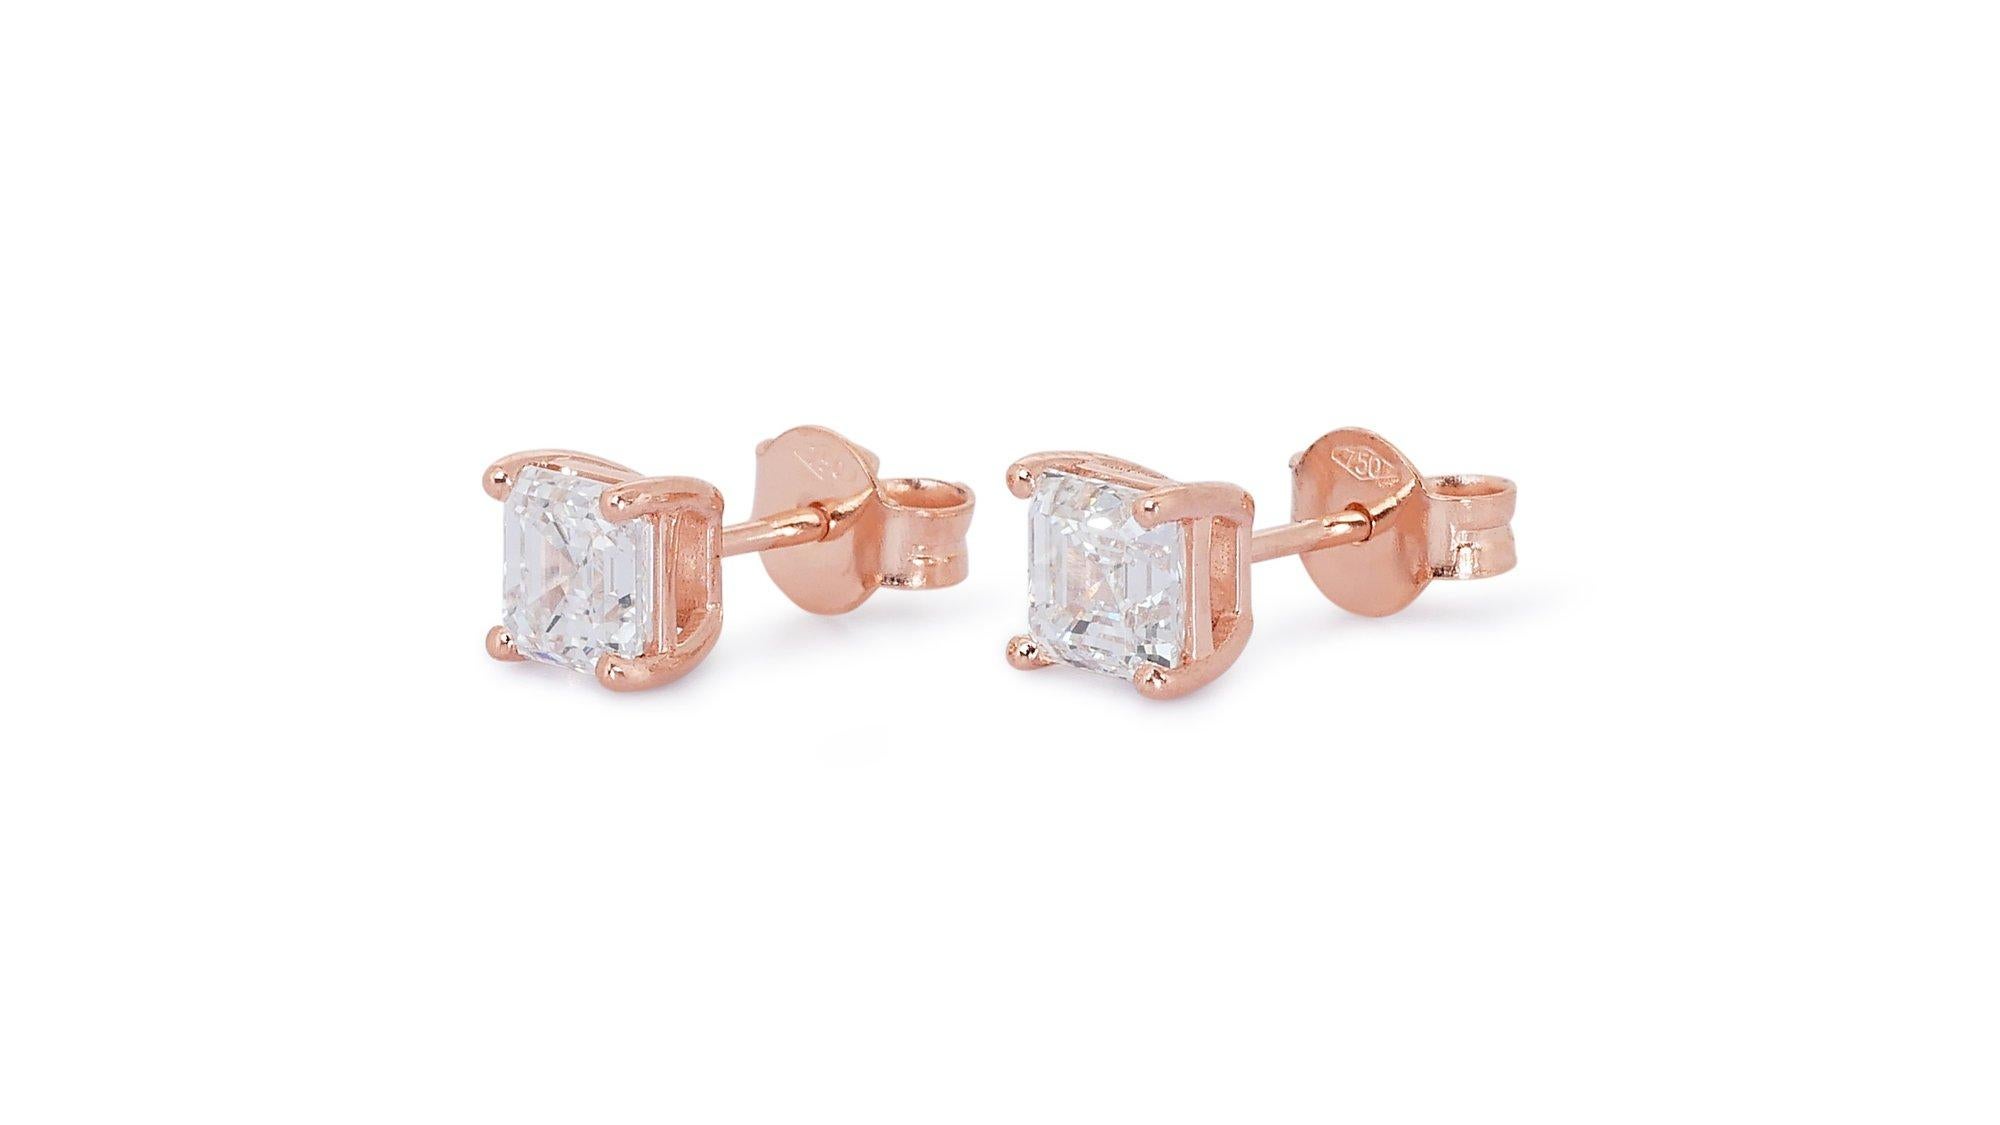 Enchanting 18K Rose Gold Natural Diamond Stud Earrings w/2.02ct - GIA Certified

These enchanting stud earrings boast a total carat weight of 2.02 carats, making them a truly magnificent statement piece. Each earring features a dazzling diamond,